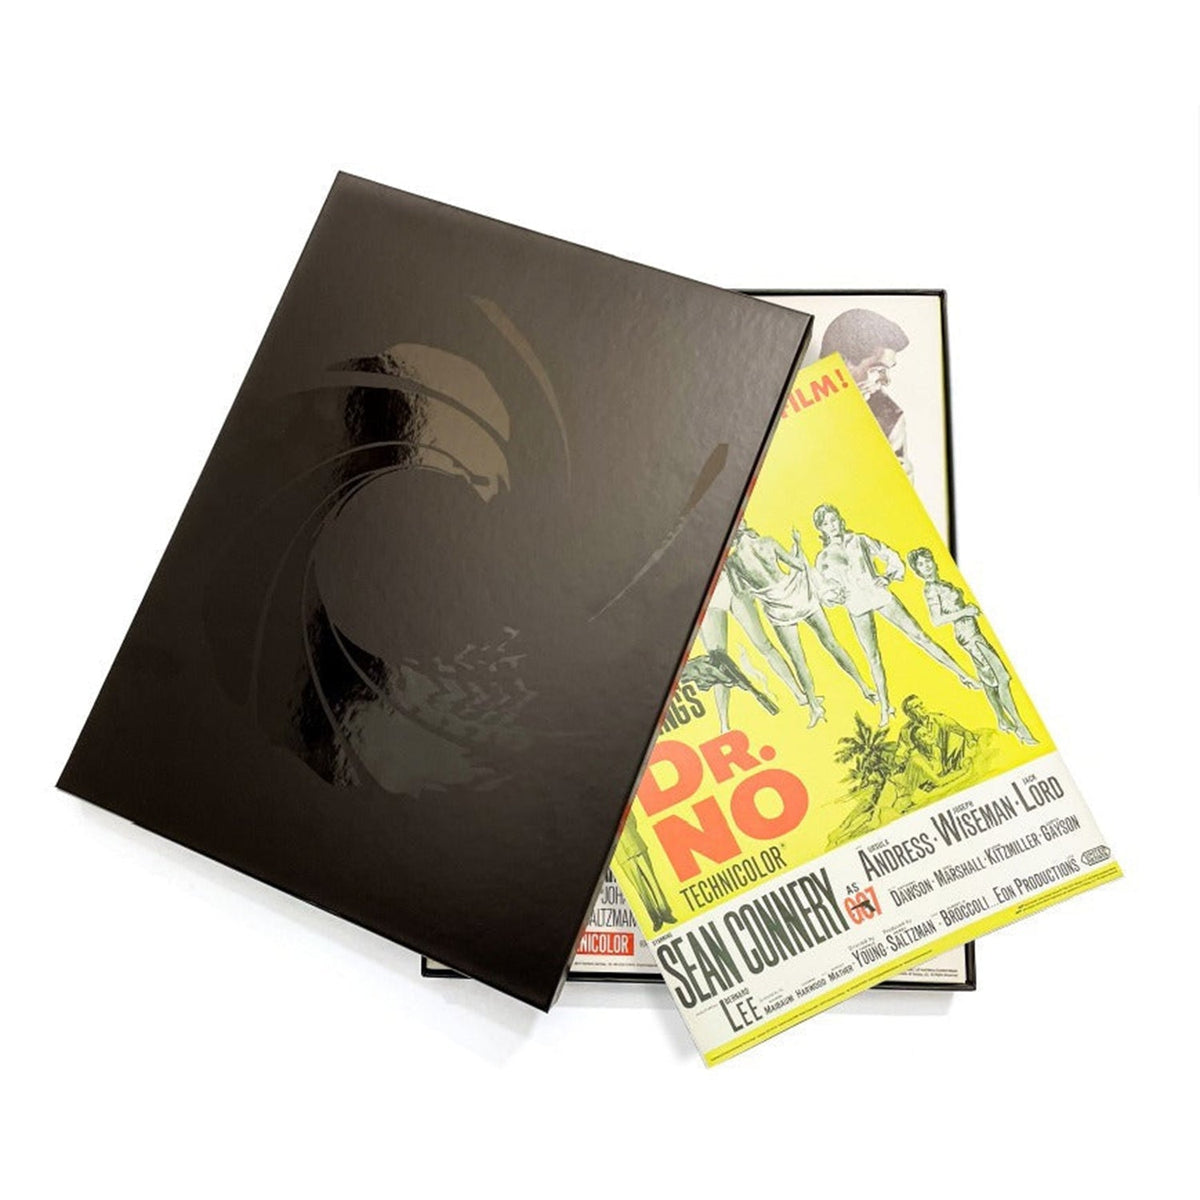 James Bond 60th Anniversary Print Box Set - Numbered Edition (Outlet Item)